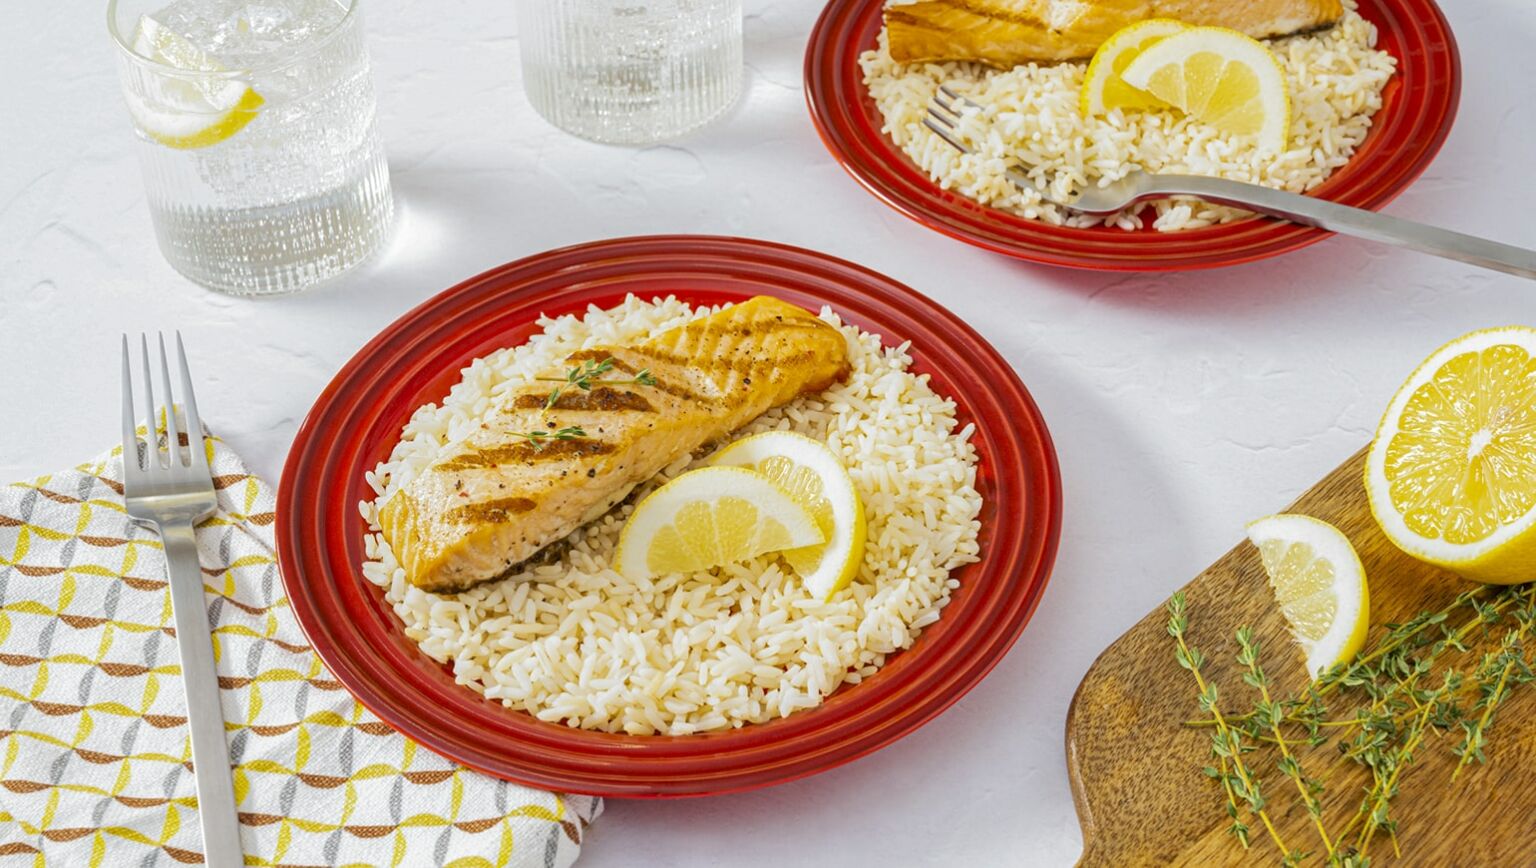 Grilled Salmon & Rice